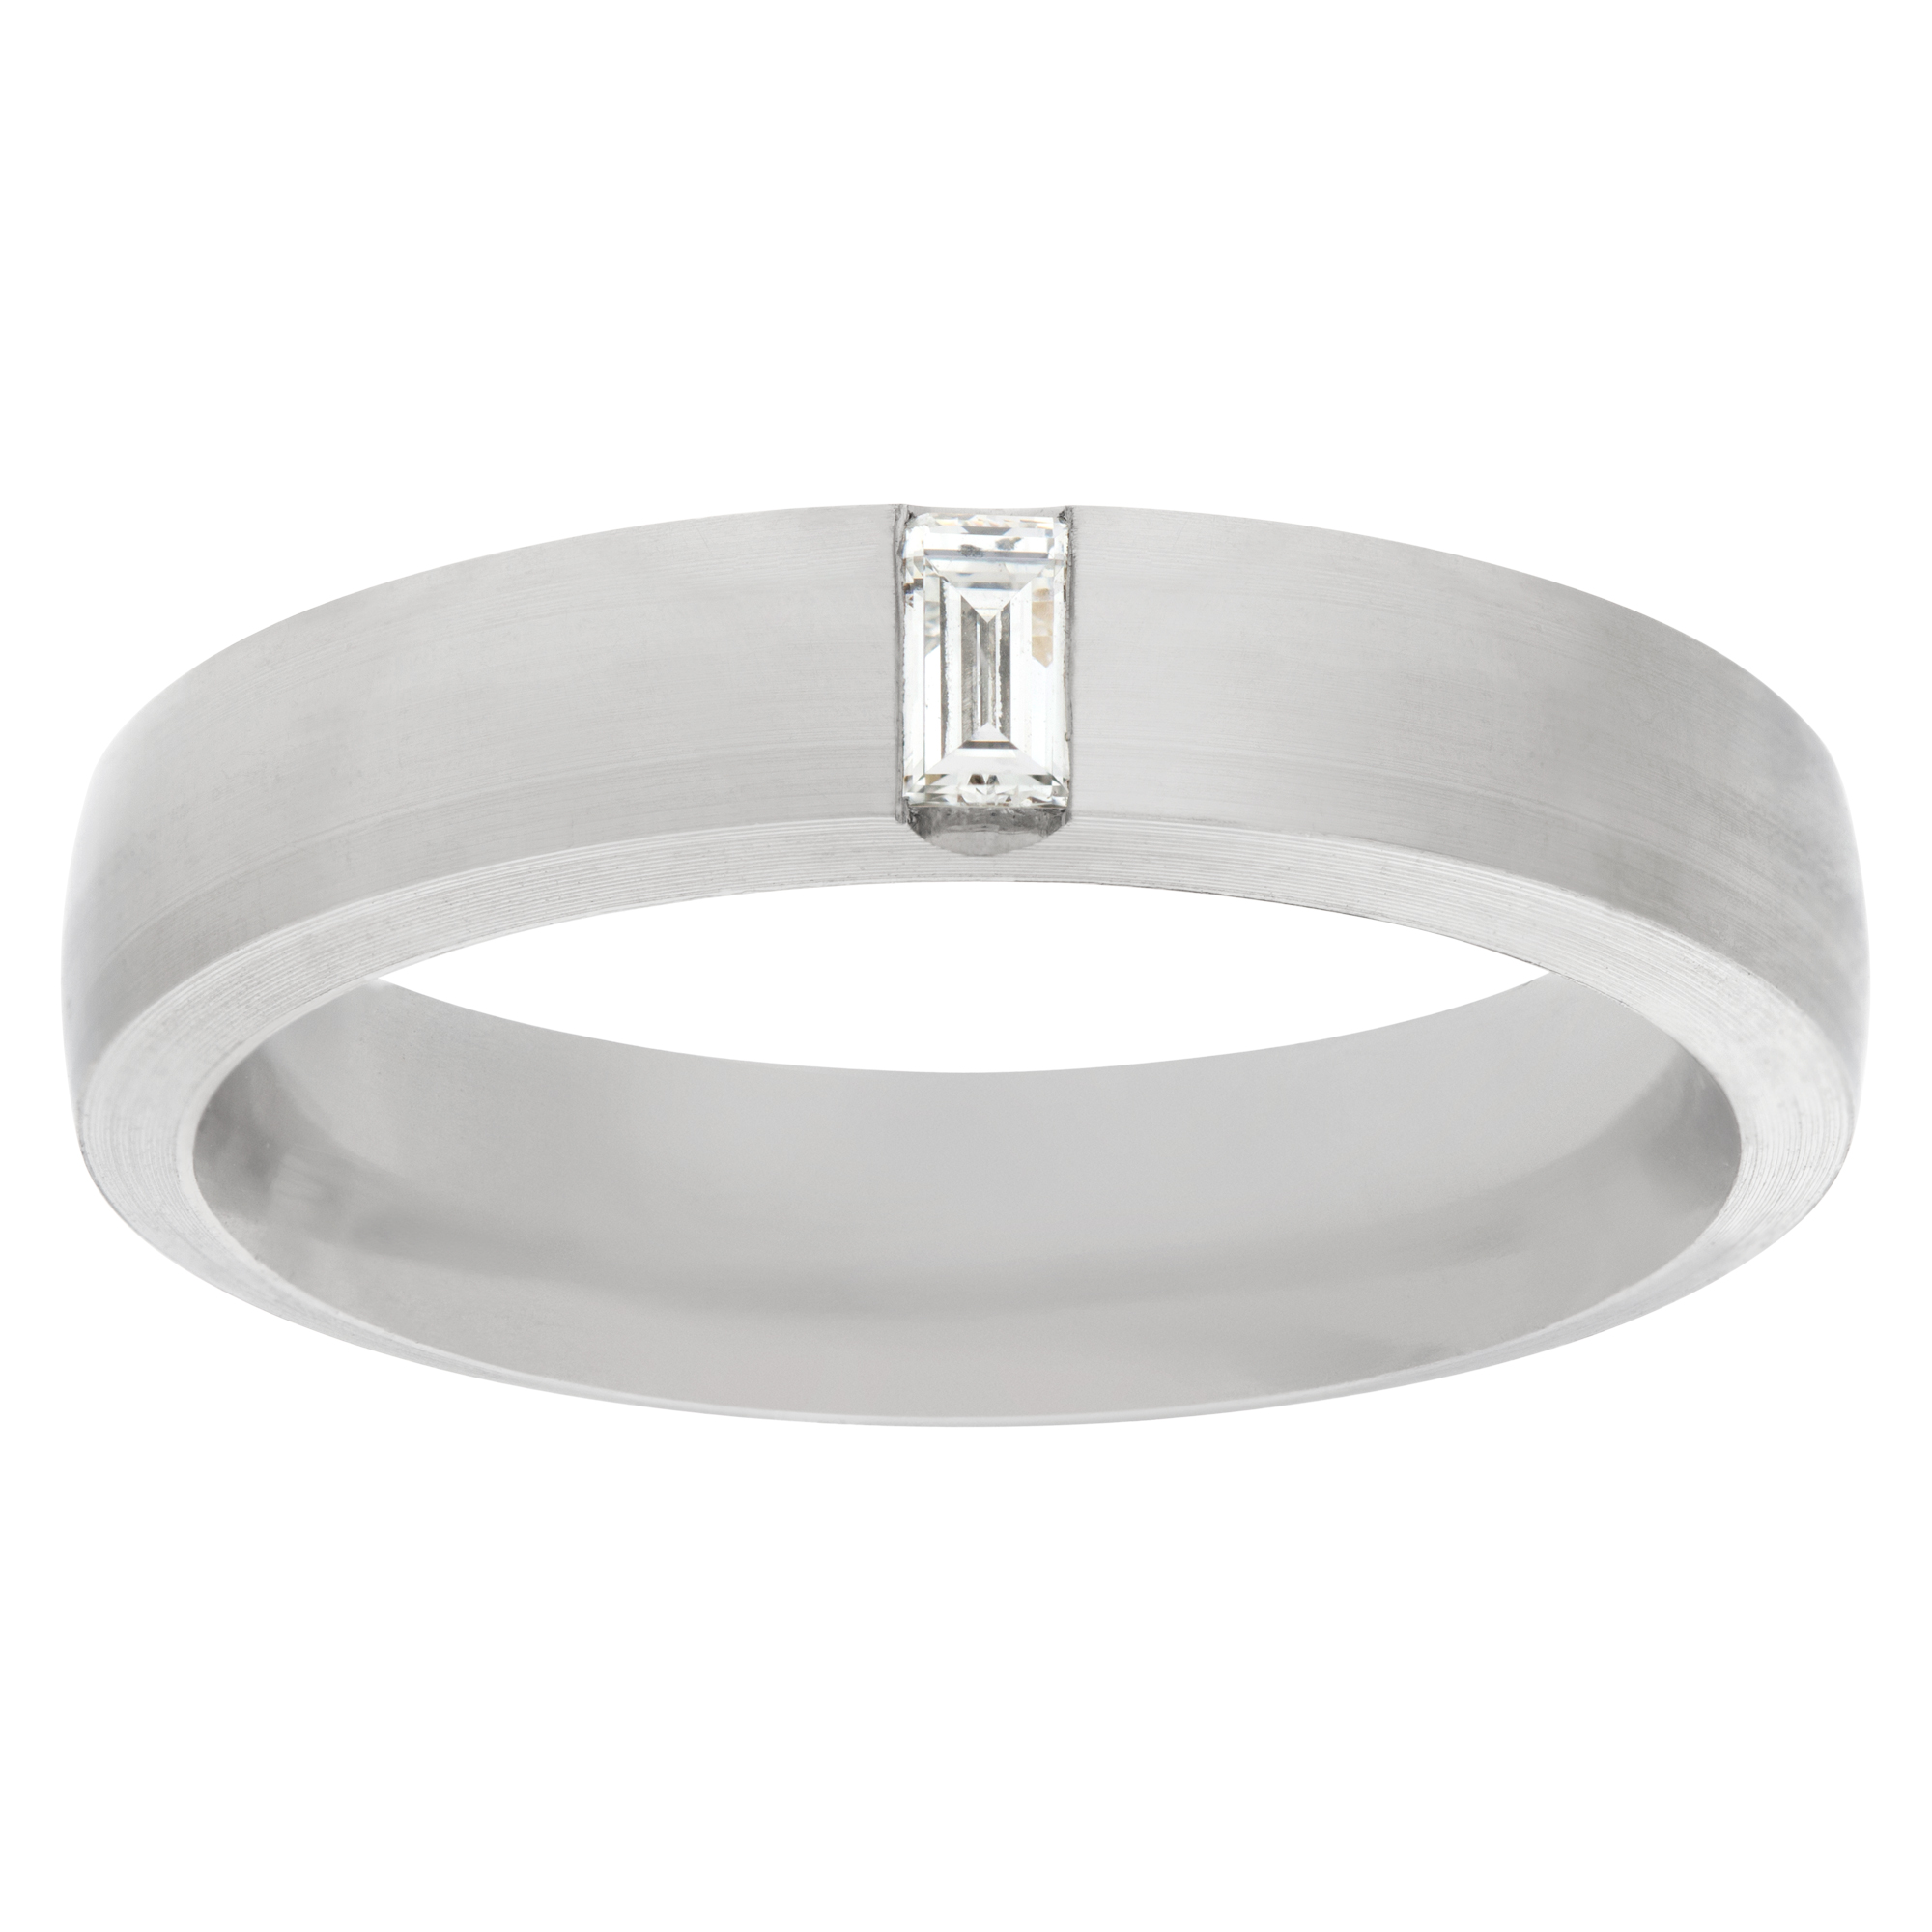 Tiffany & Co.Satin platinum ring with a baguette diamond image 1